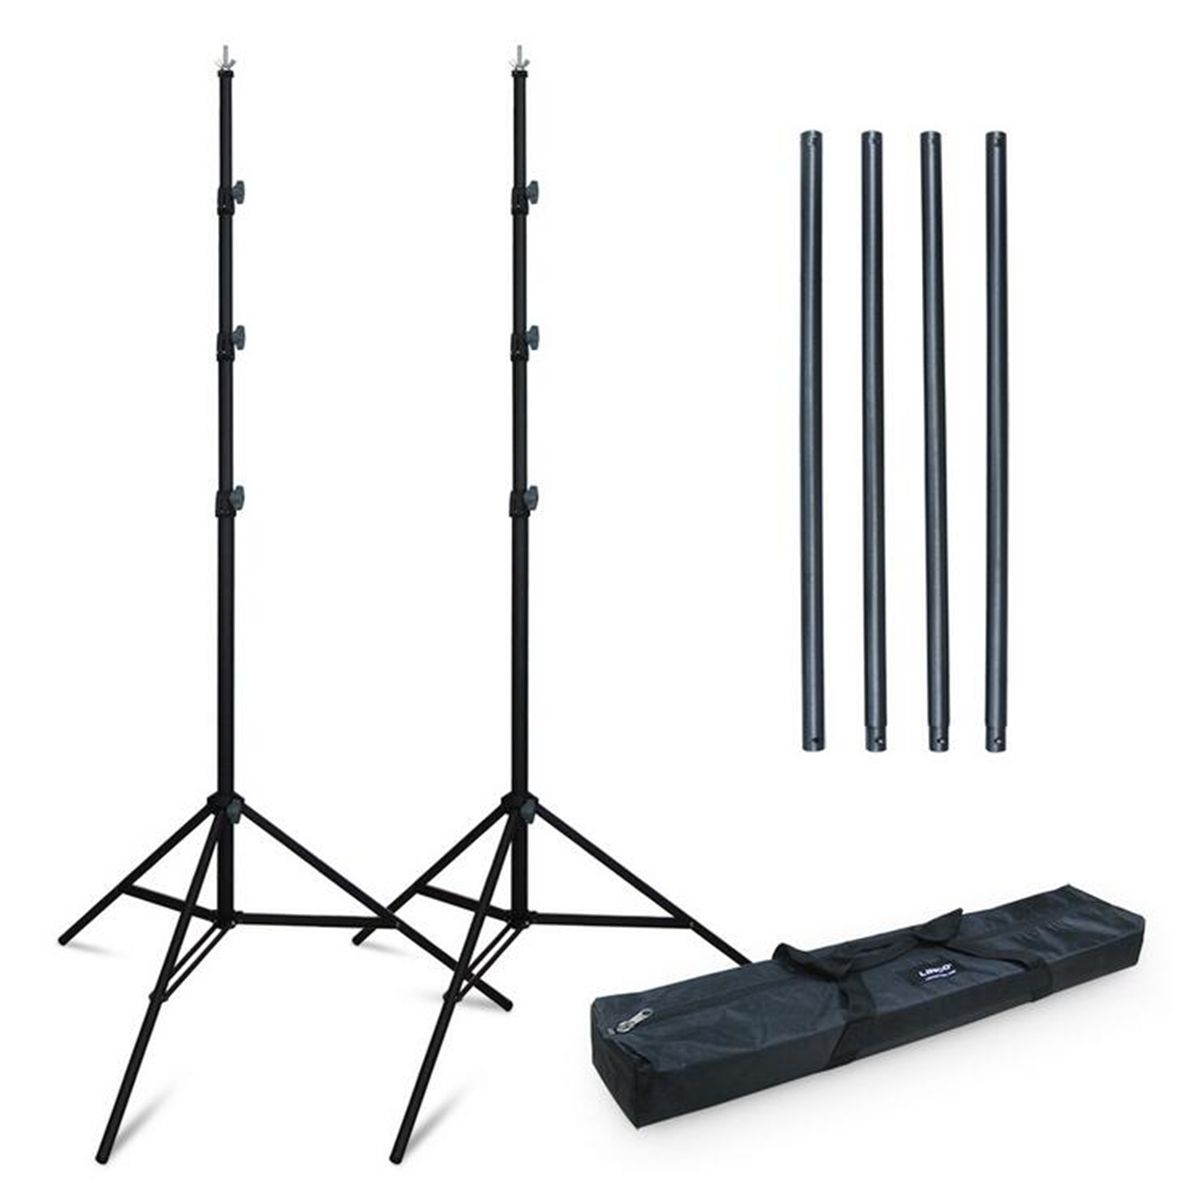 3x28m-Adjustable-Foldable-Photography-Background-Stand-Tripod-Support-Portable-Studio-Backdrop-Kits-1600733